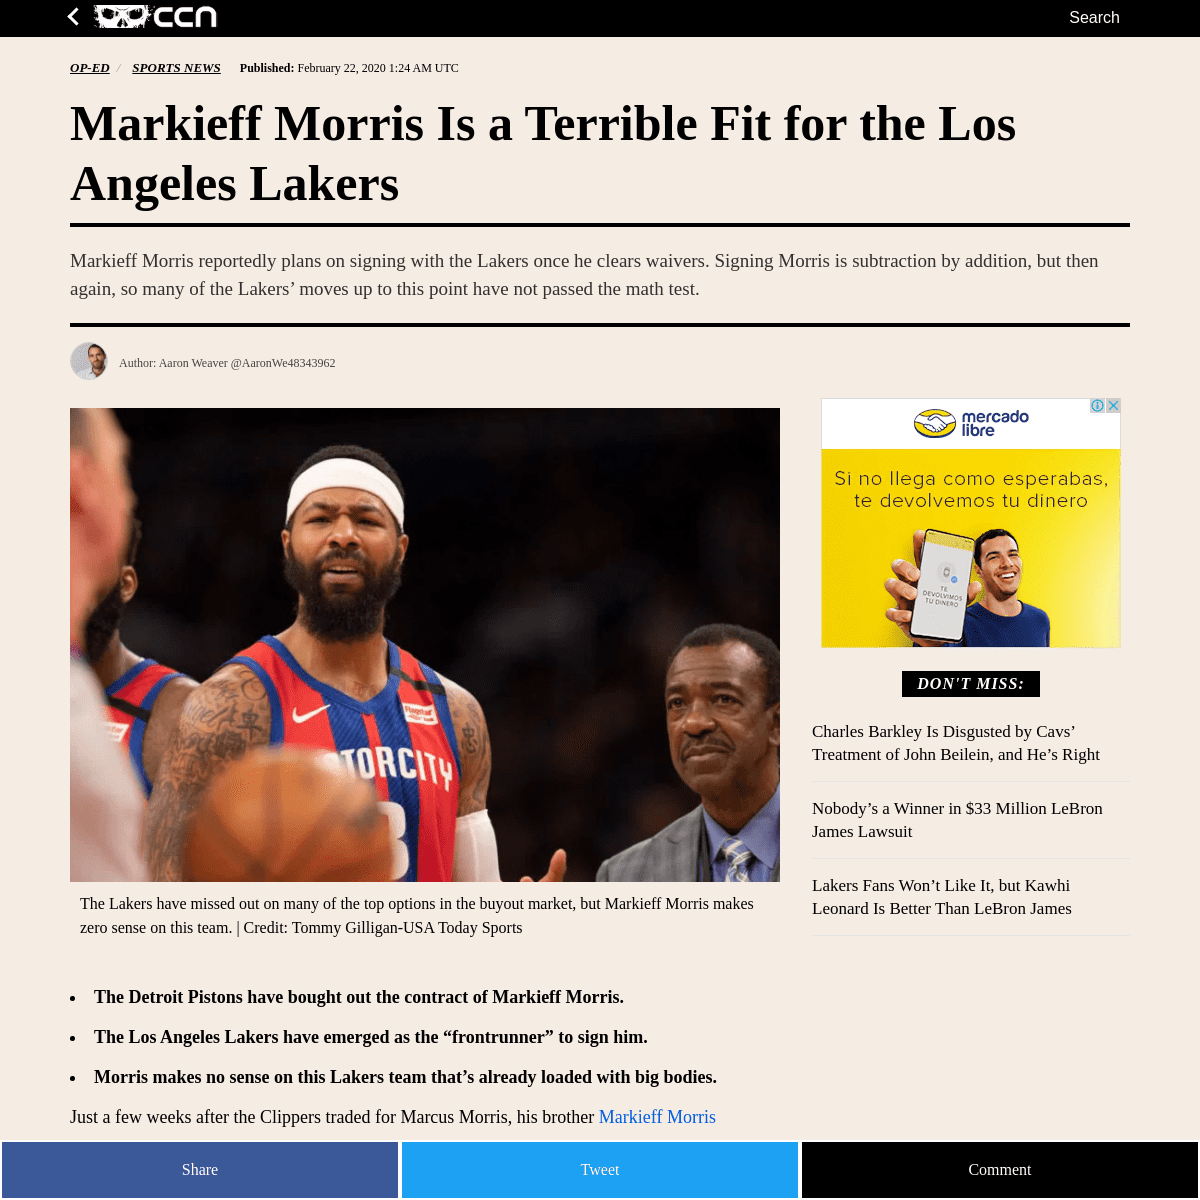 A complete backup of www.ccn.com/markieff-morris-is-a-terrible-fit-for-the-los-angeles-lakers/